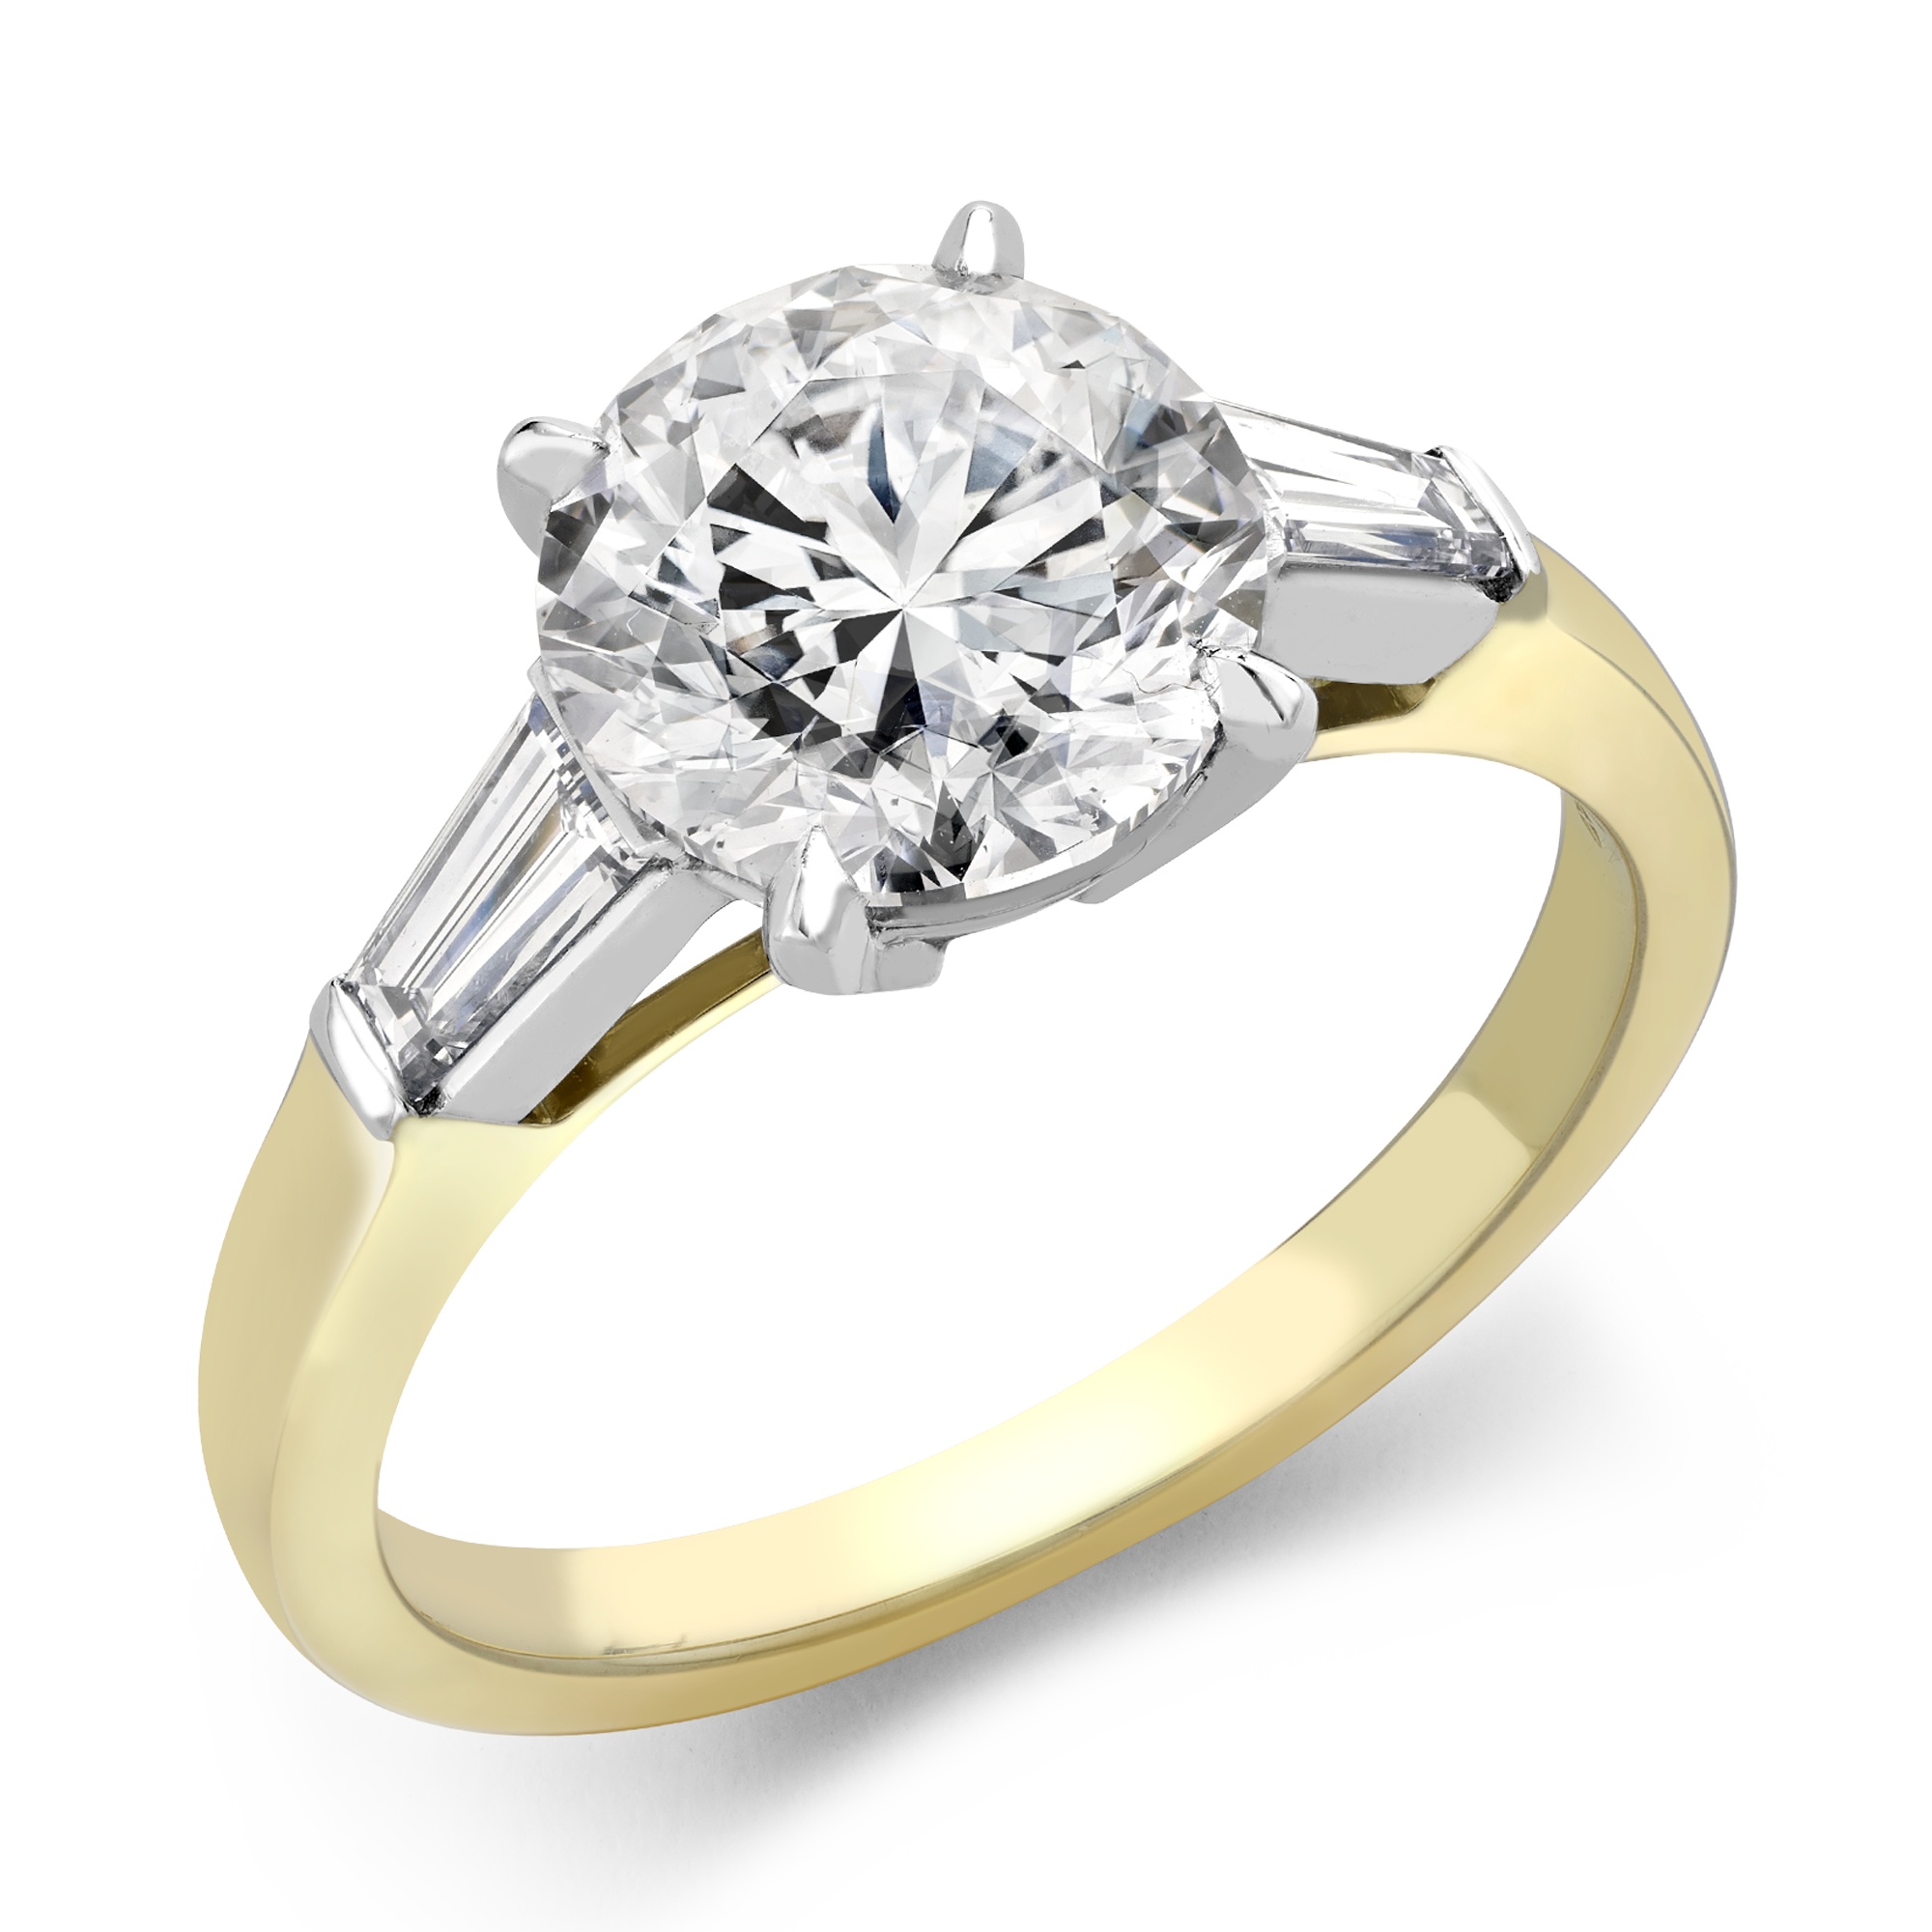 Regency 2.50ct Diamond Solitaire Ring in 18ct Yellow Gold and Platinum ...